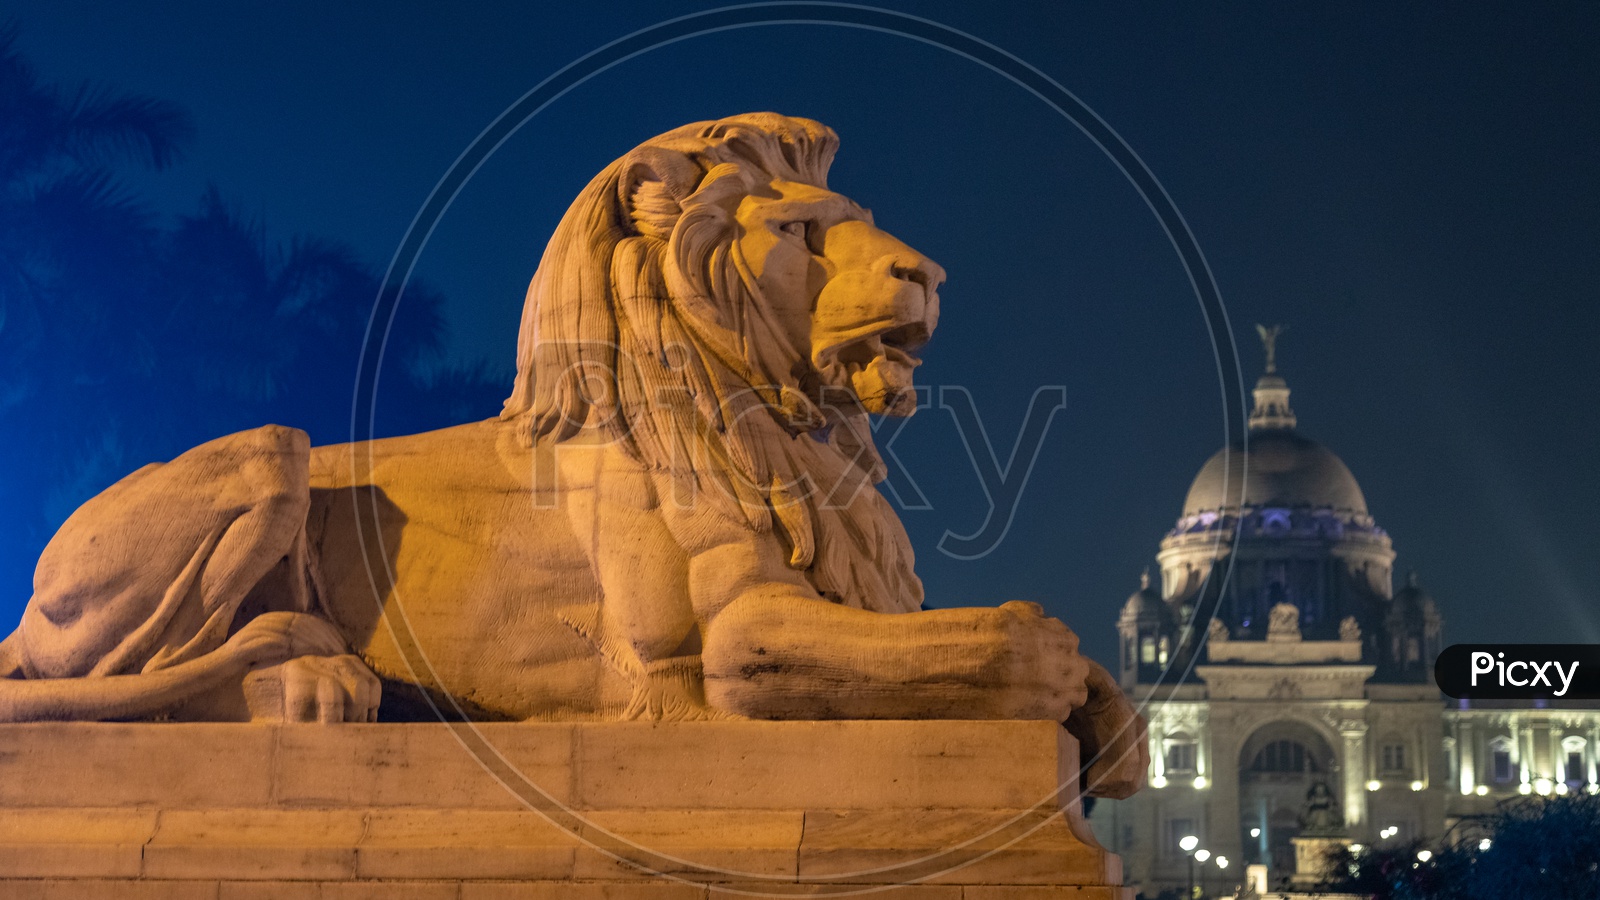 Lion statue infront of a palace in Kolkata